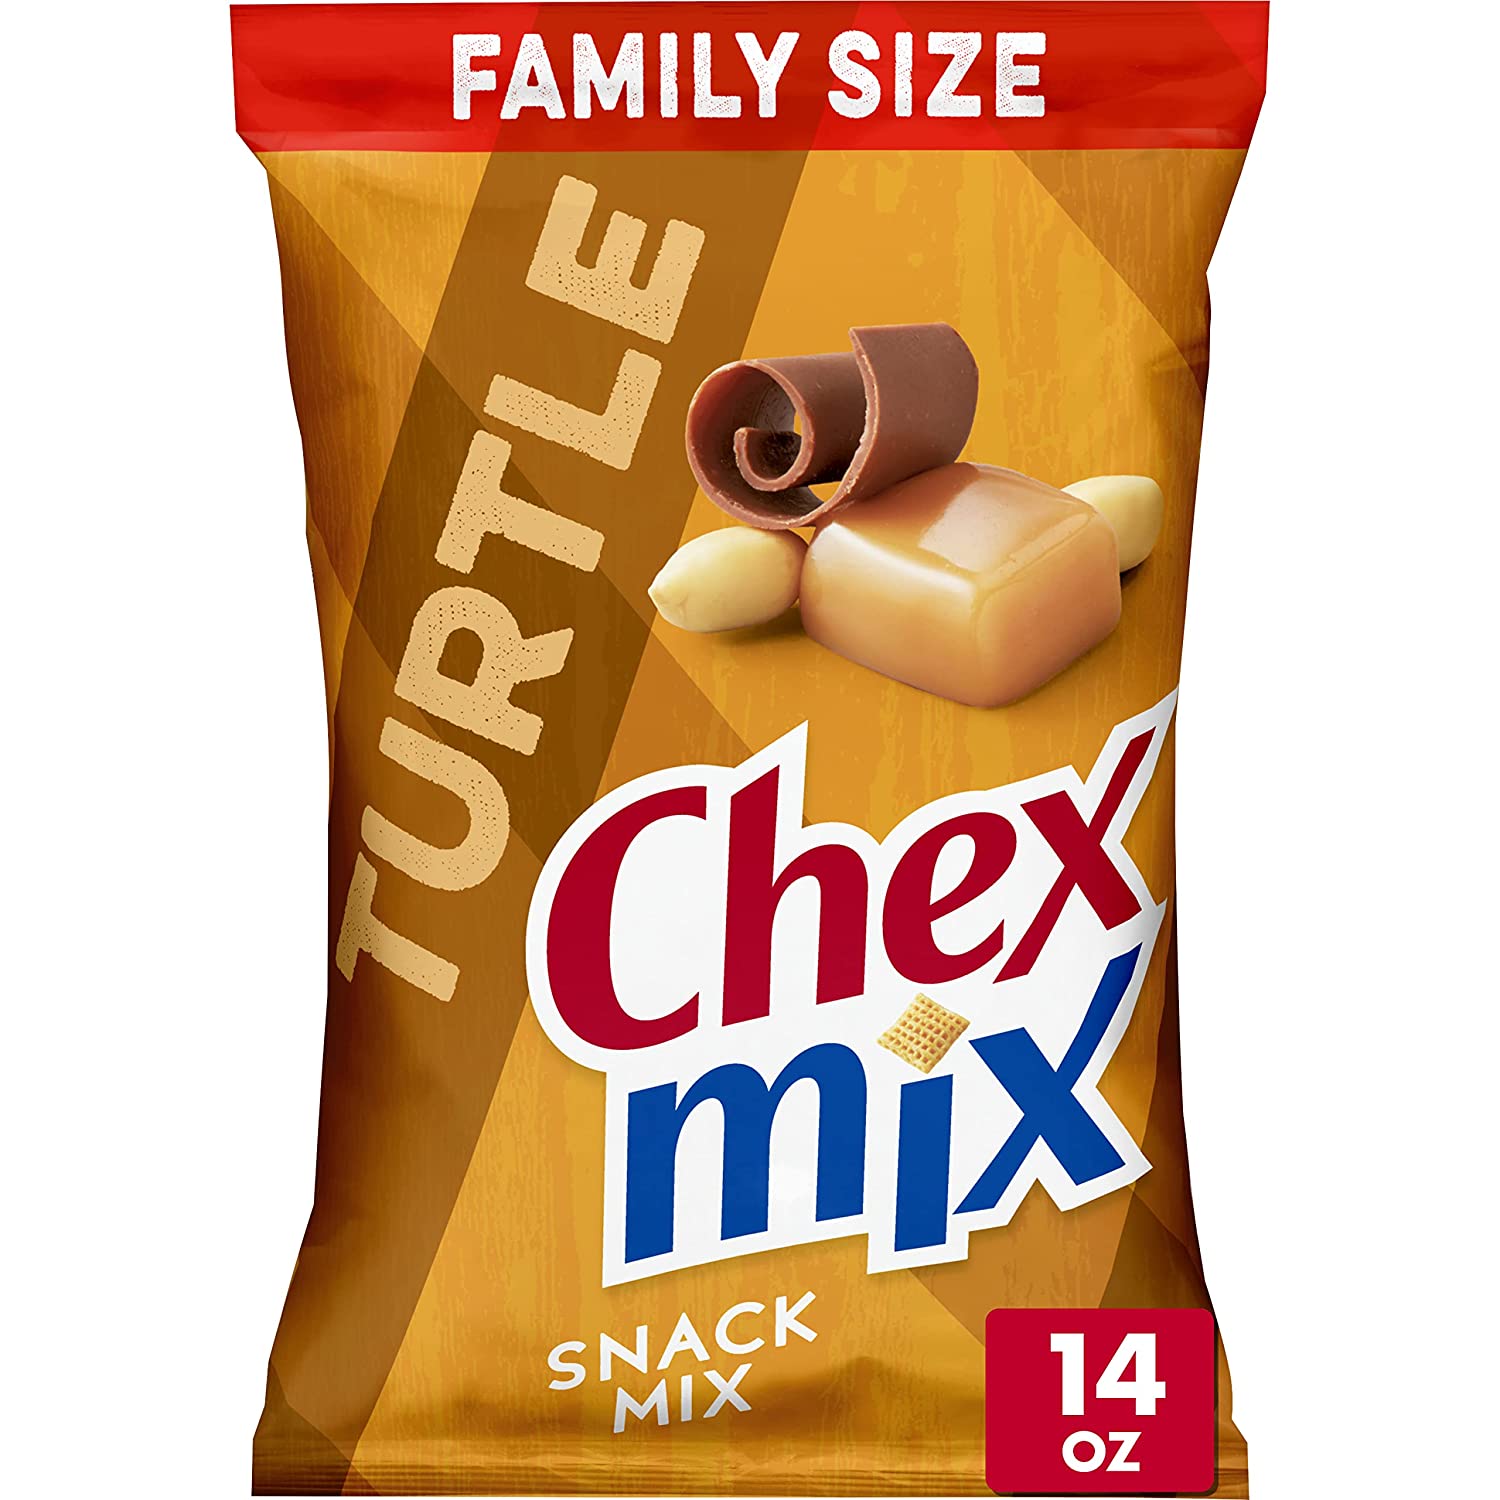 Chex Mix Snack Party Mix, Turtle, Indulgent Sweet Pub Mix Snack Bag, 14 oz